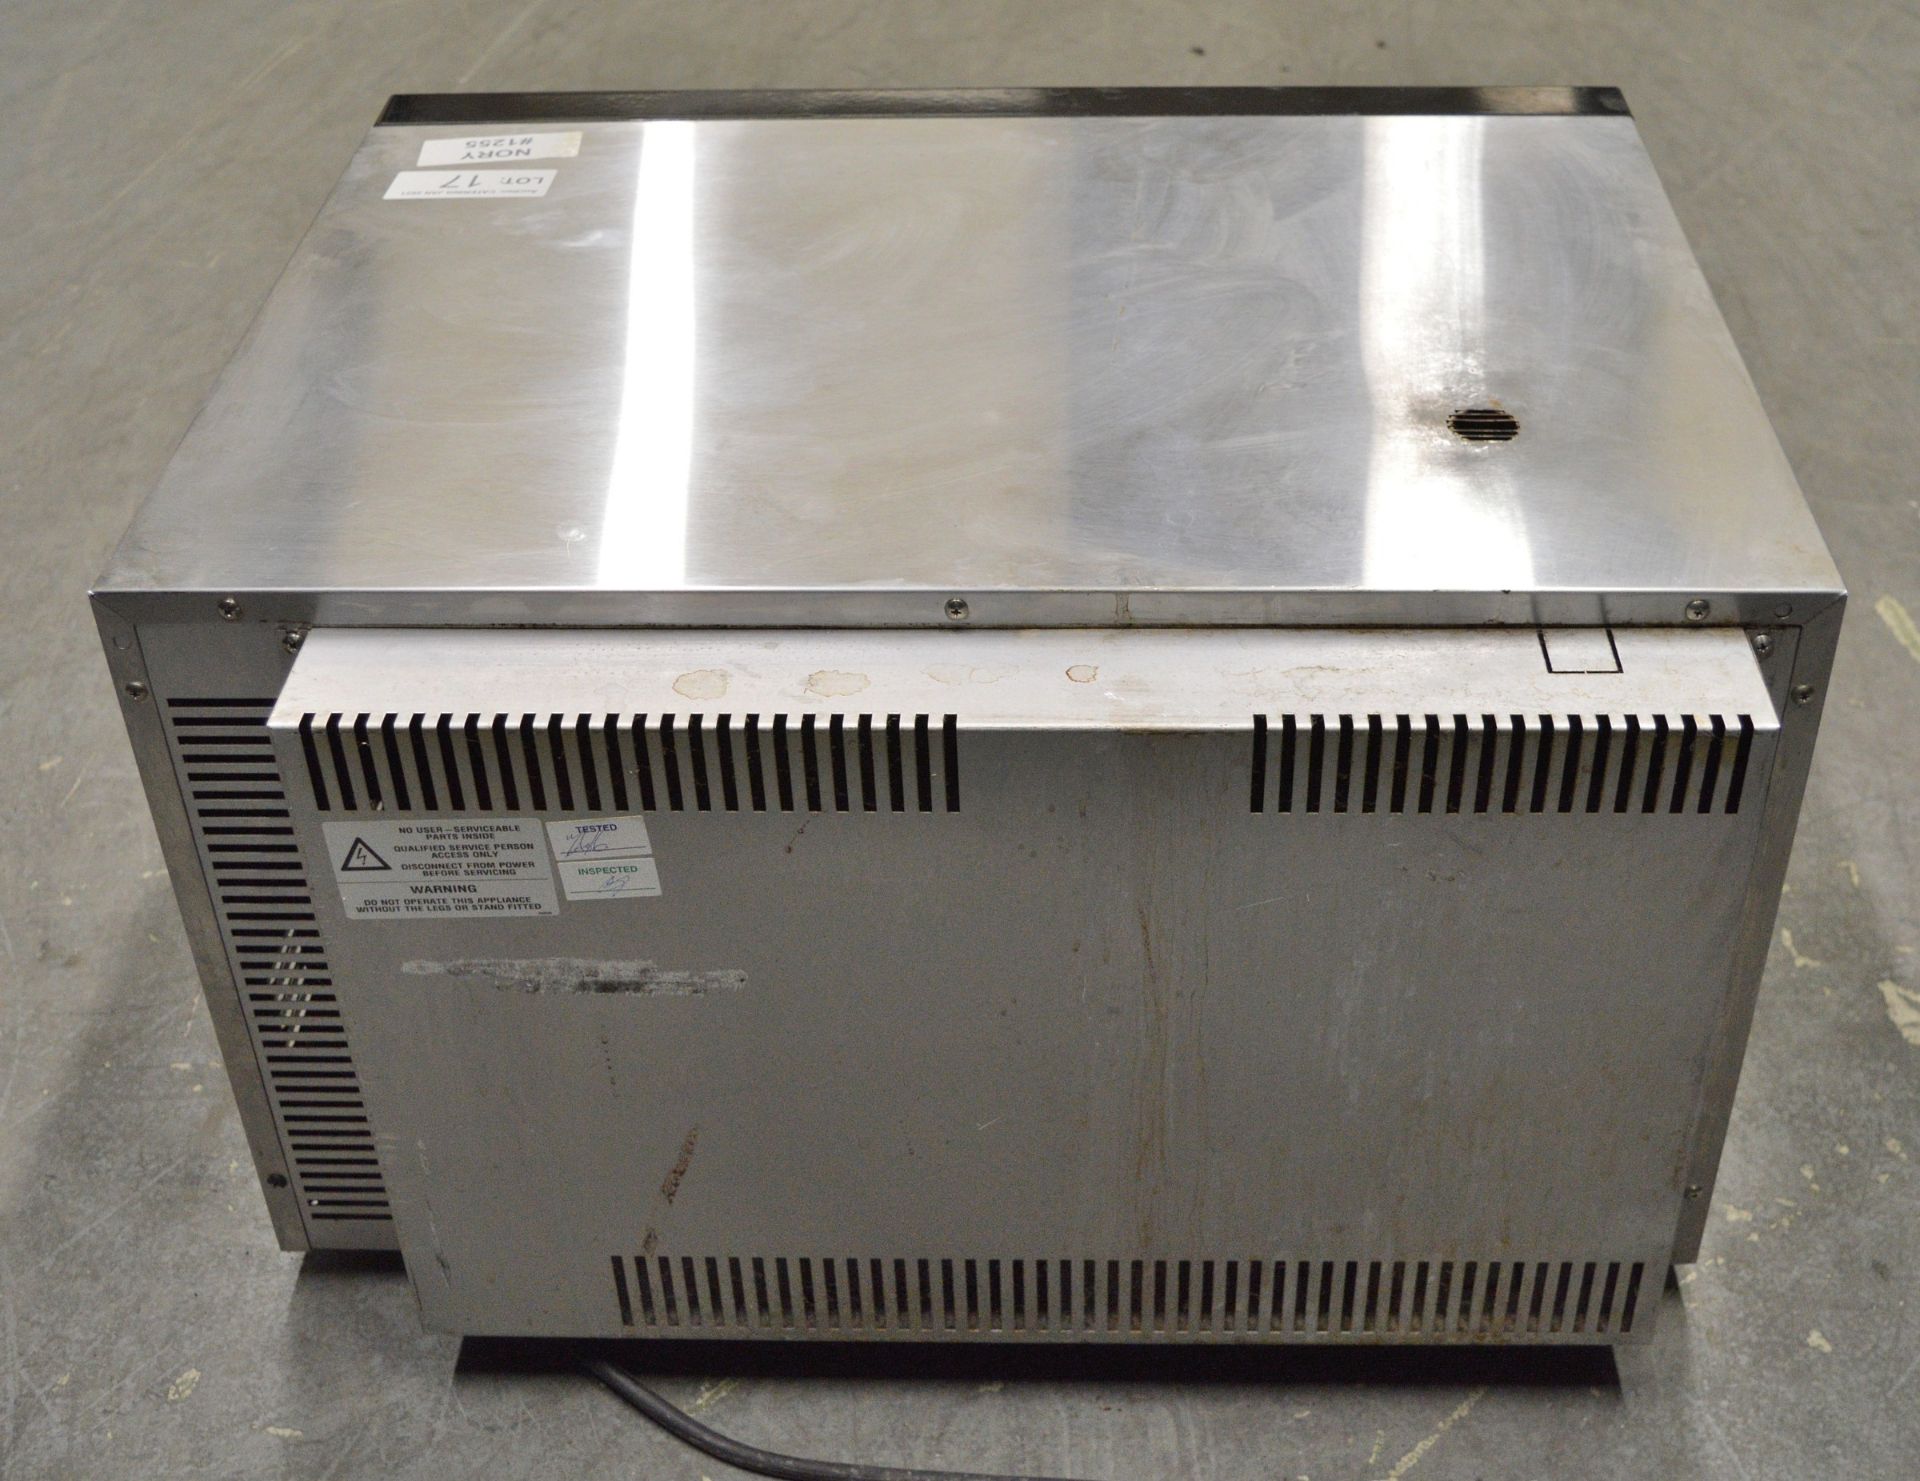 Blue Seal Turbofan E25 Convection Oven (missing foot at the rear) - Image 6 of 6